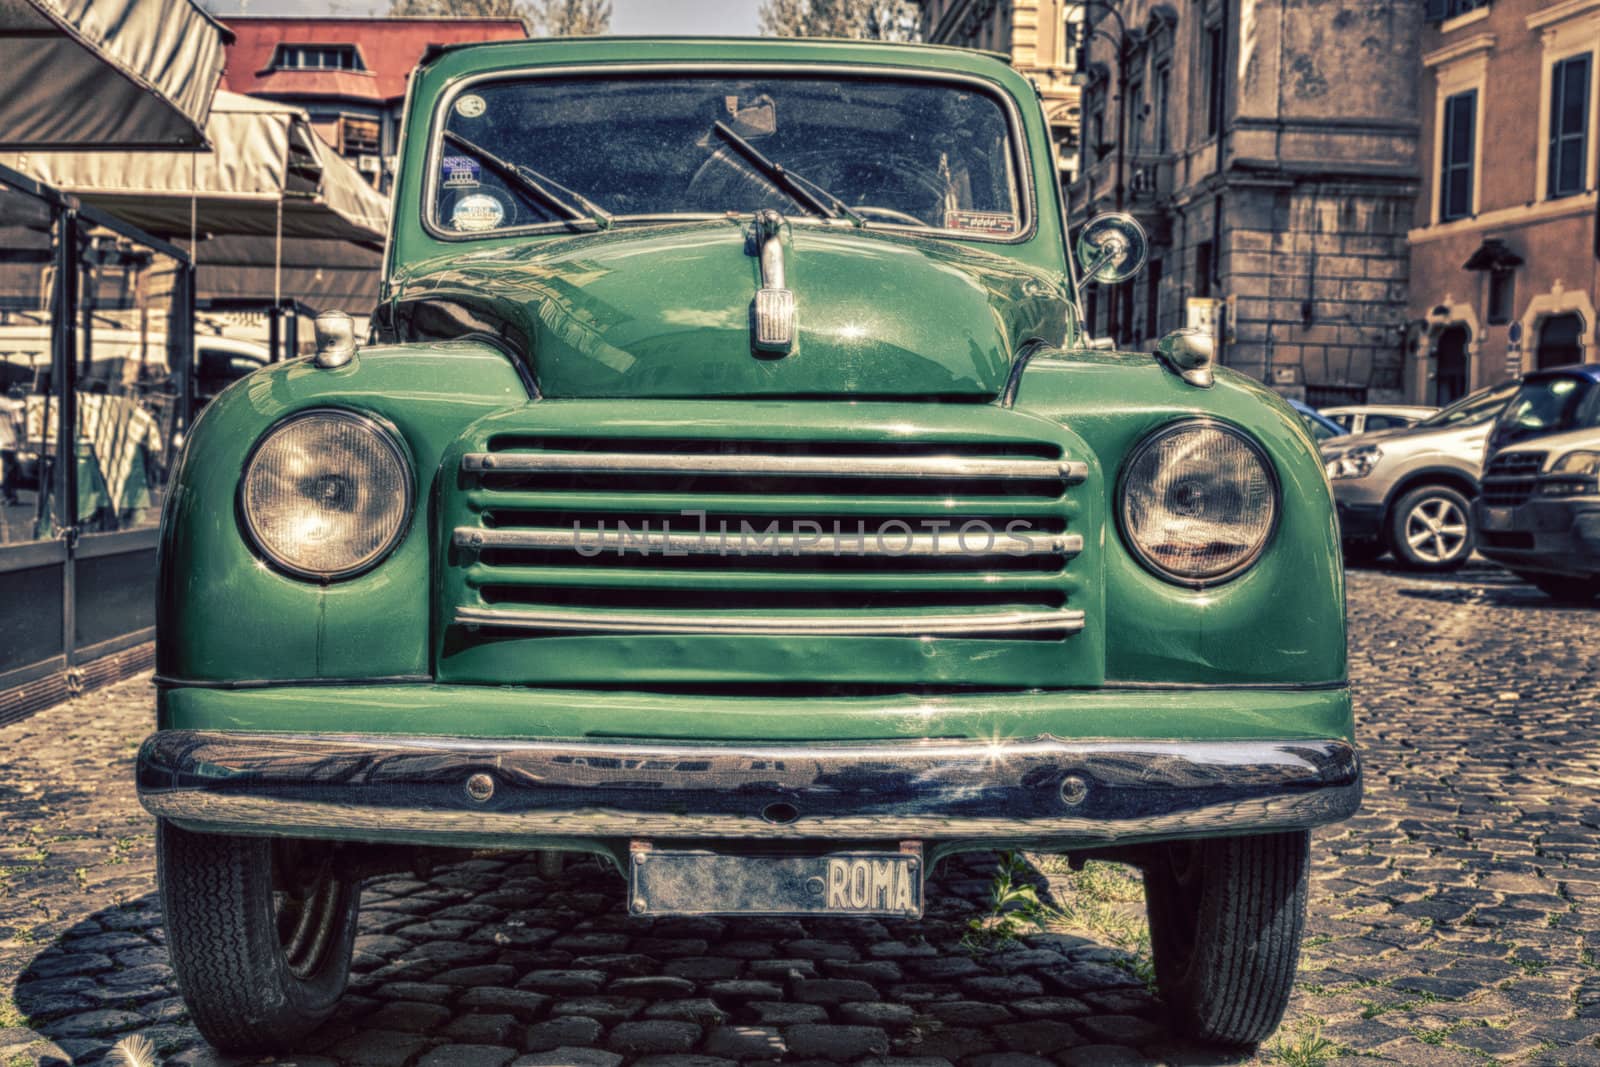 Old car in Rome by shamtor